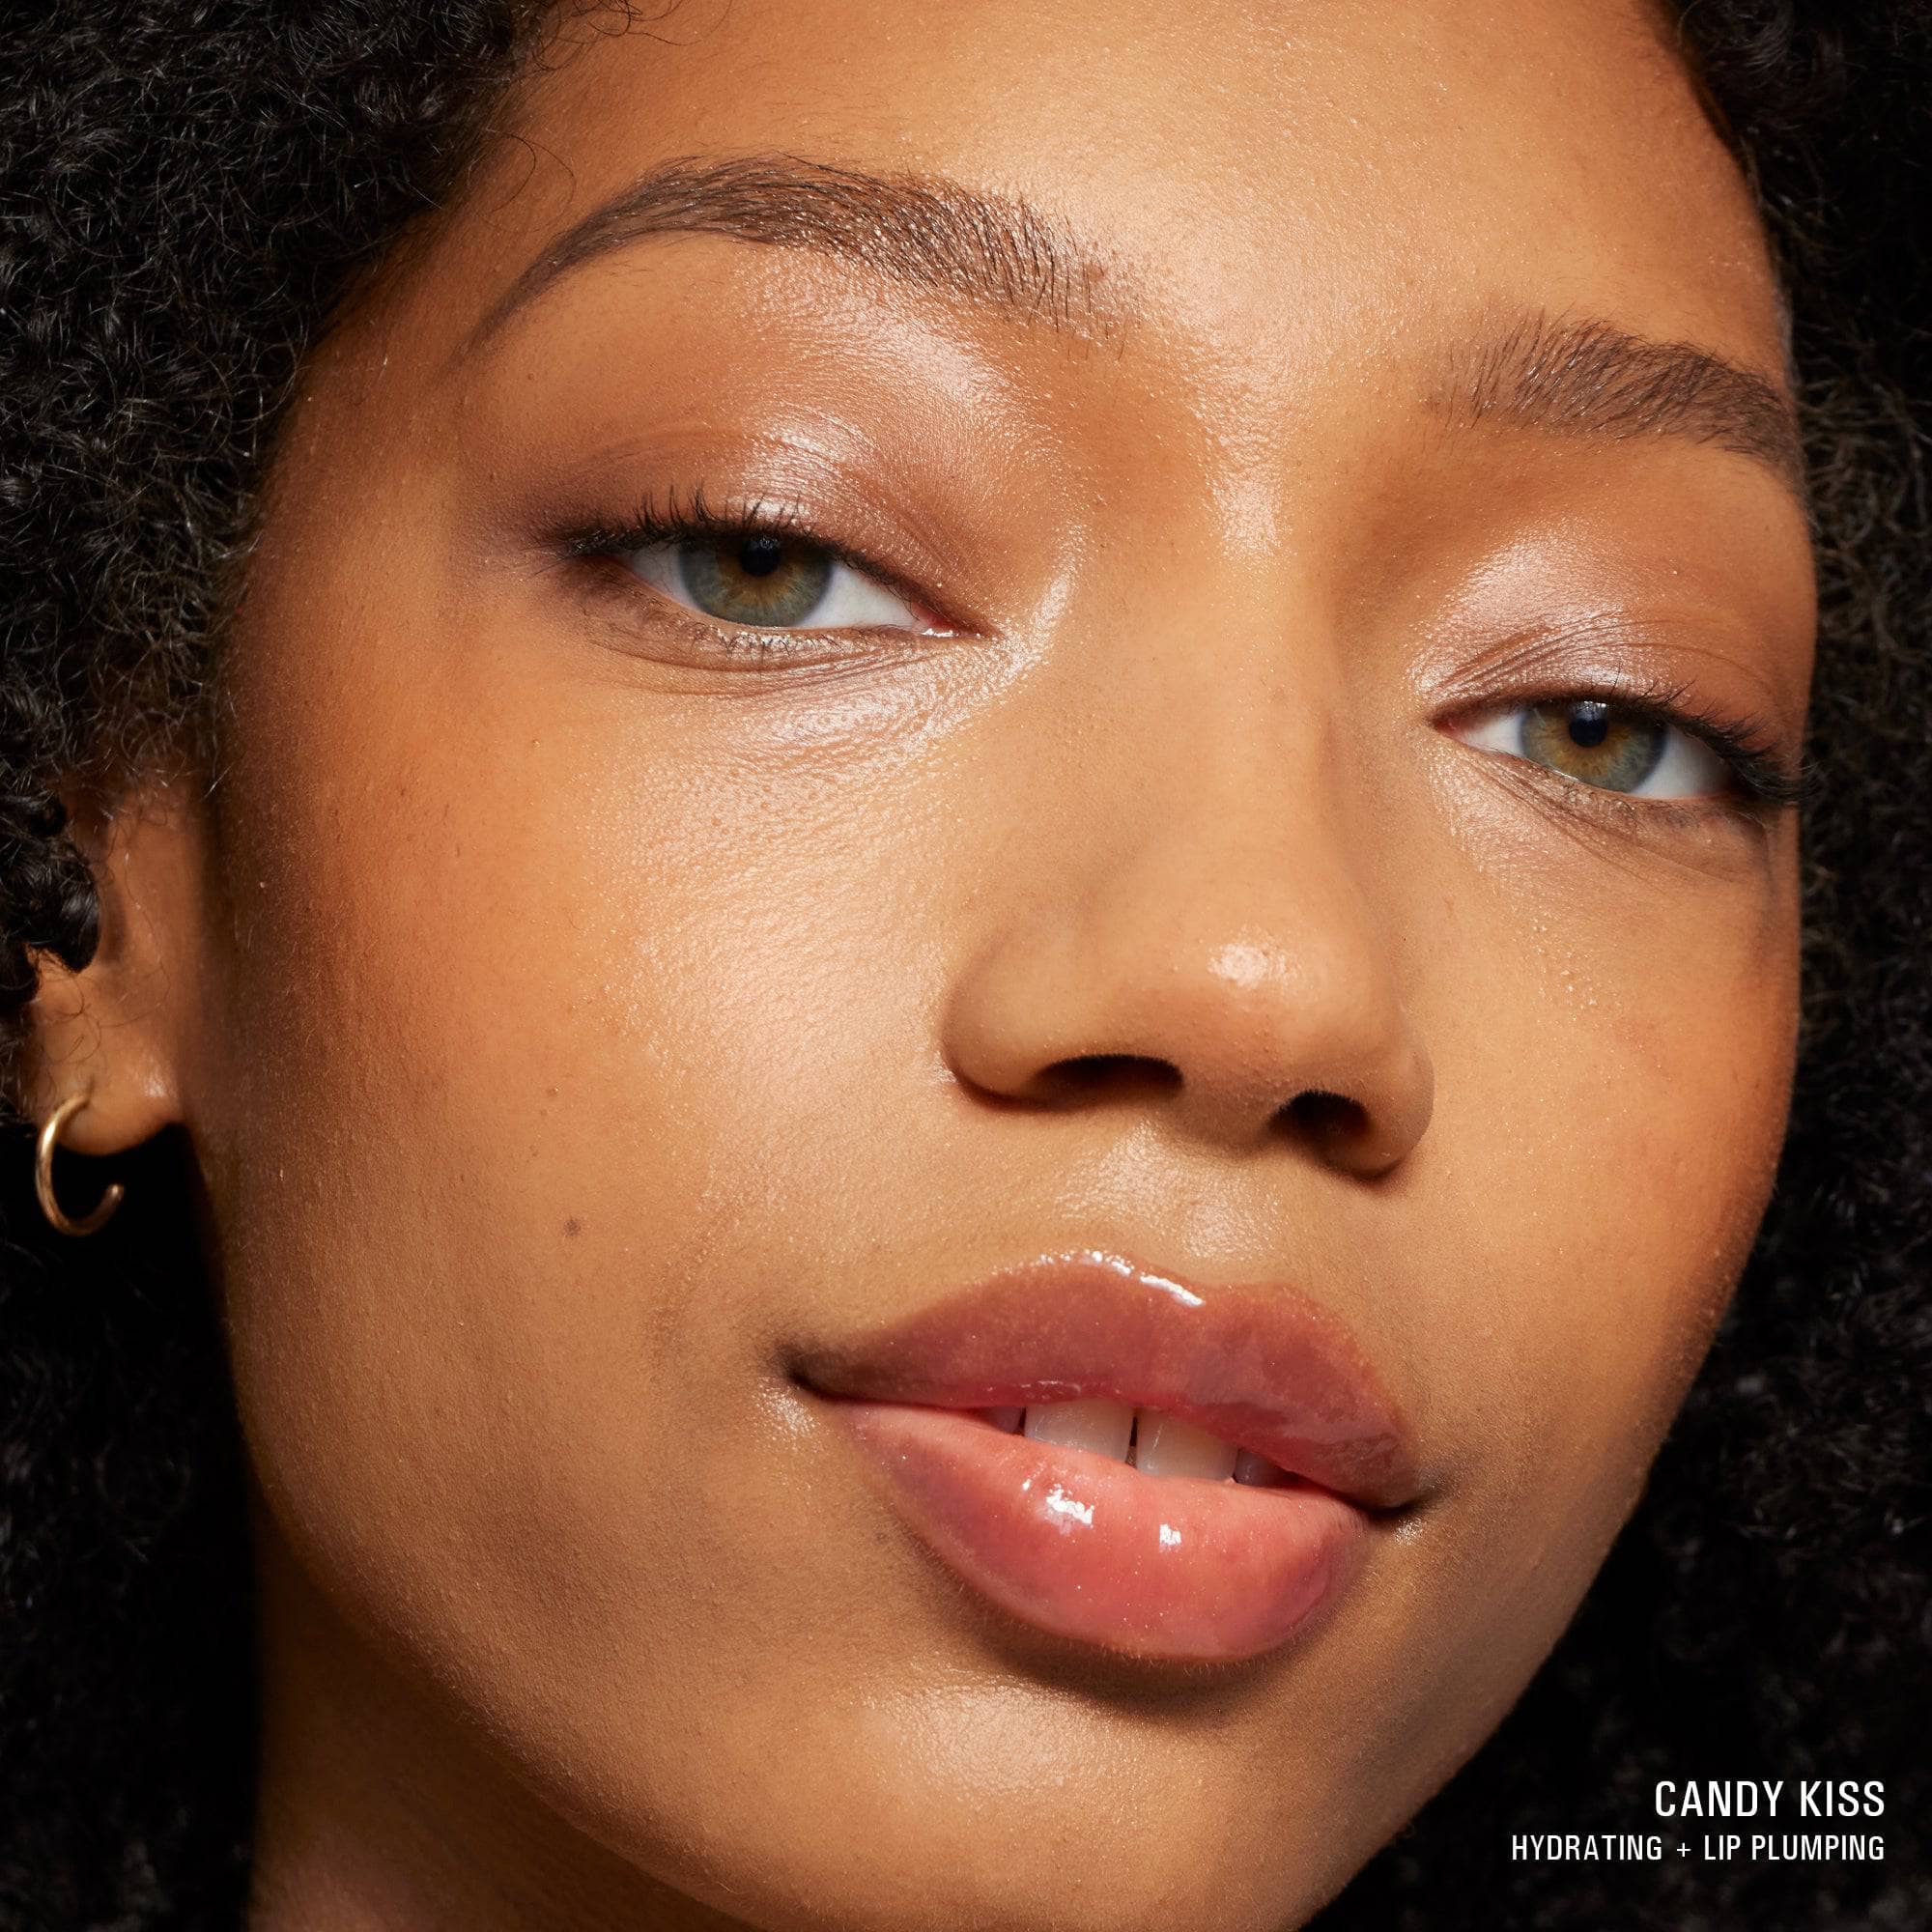 Mixed race young woman wearing Hydra-Peptide Lip Butter in shade Candy Kiss